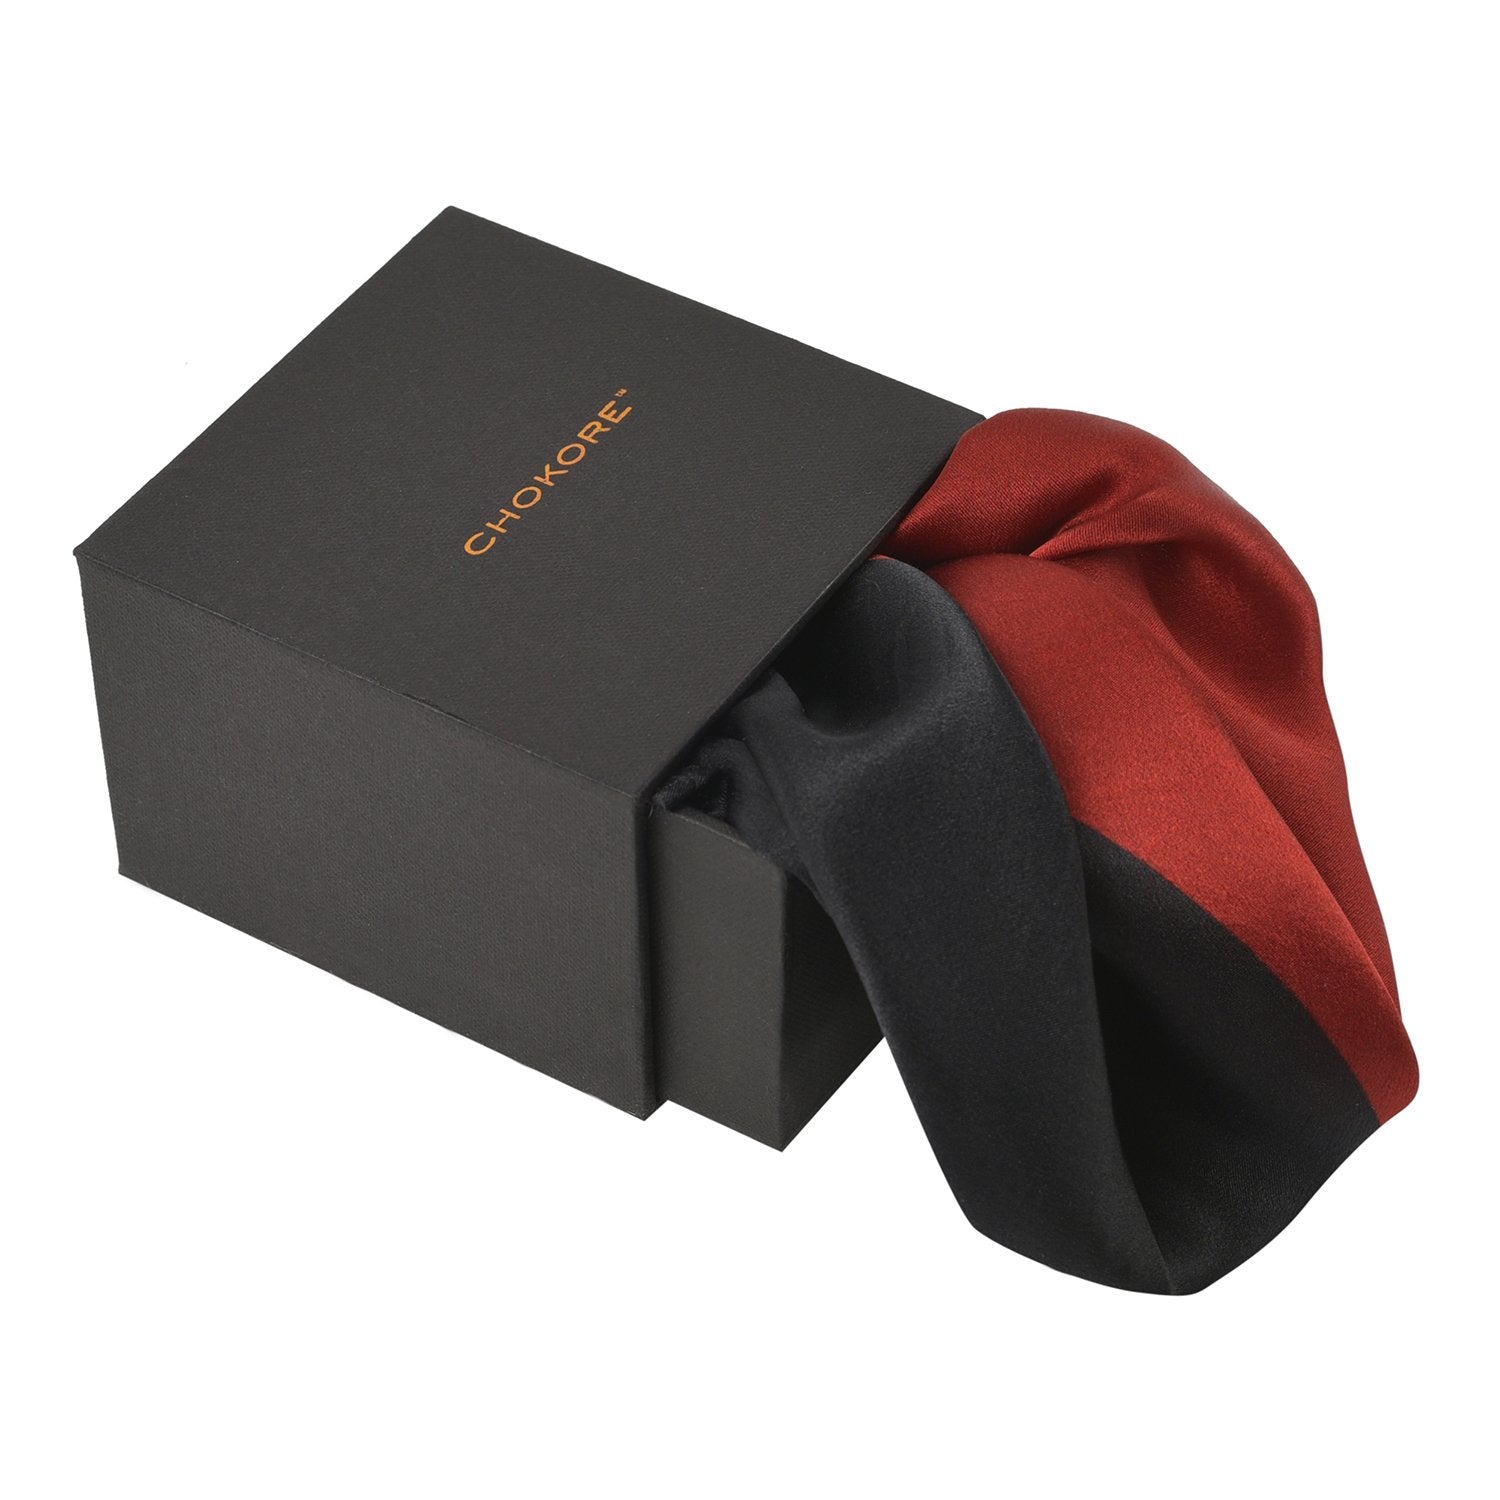 Chokore 2-in-1 Red & Black Silk Pocket Square from the Solids Line